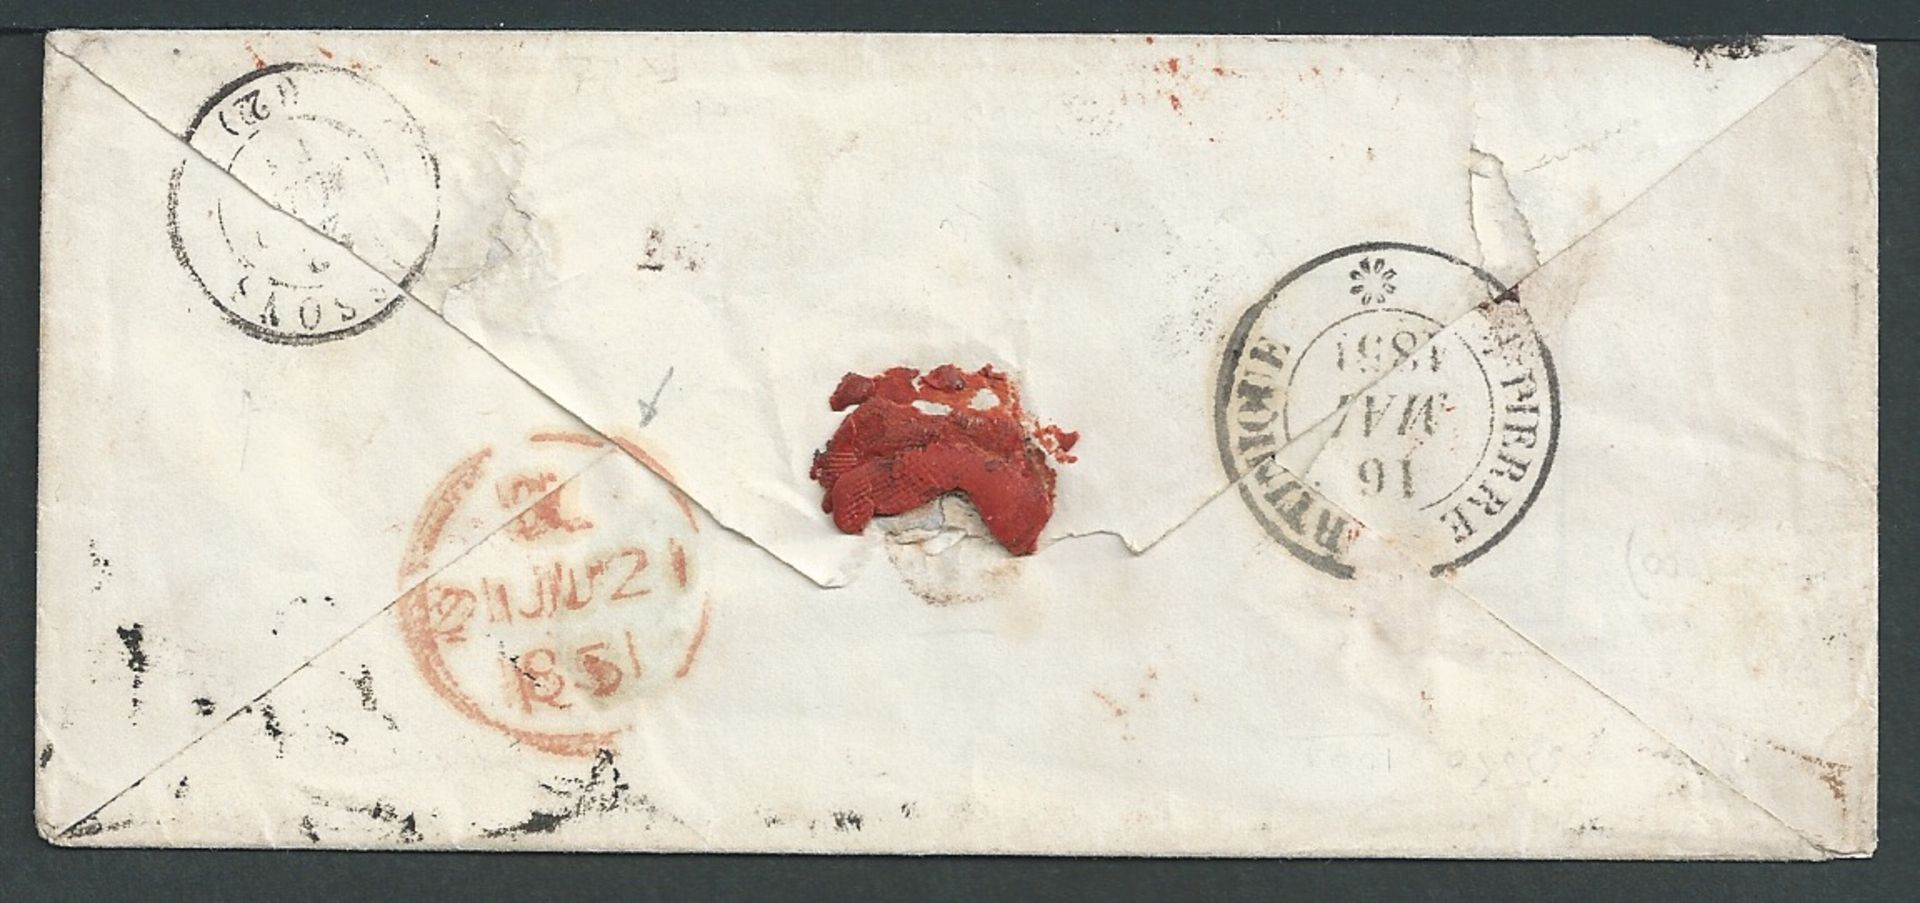 French Colonies - Martinique 1851 Cover to France with blue framed "MARIN" (Jamet type 1, recorde... - Image 2 of 2